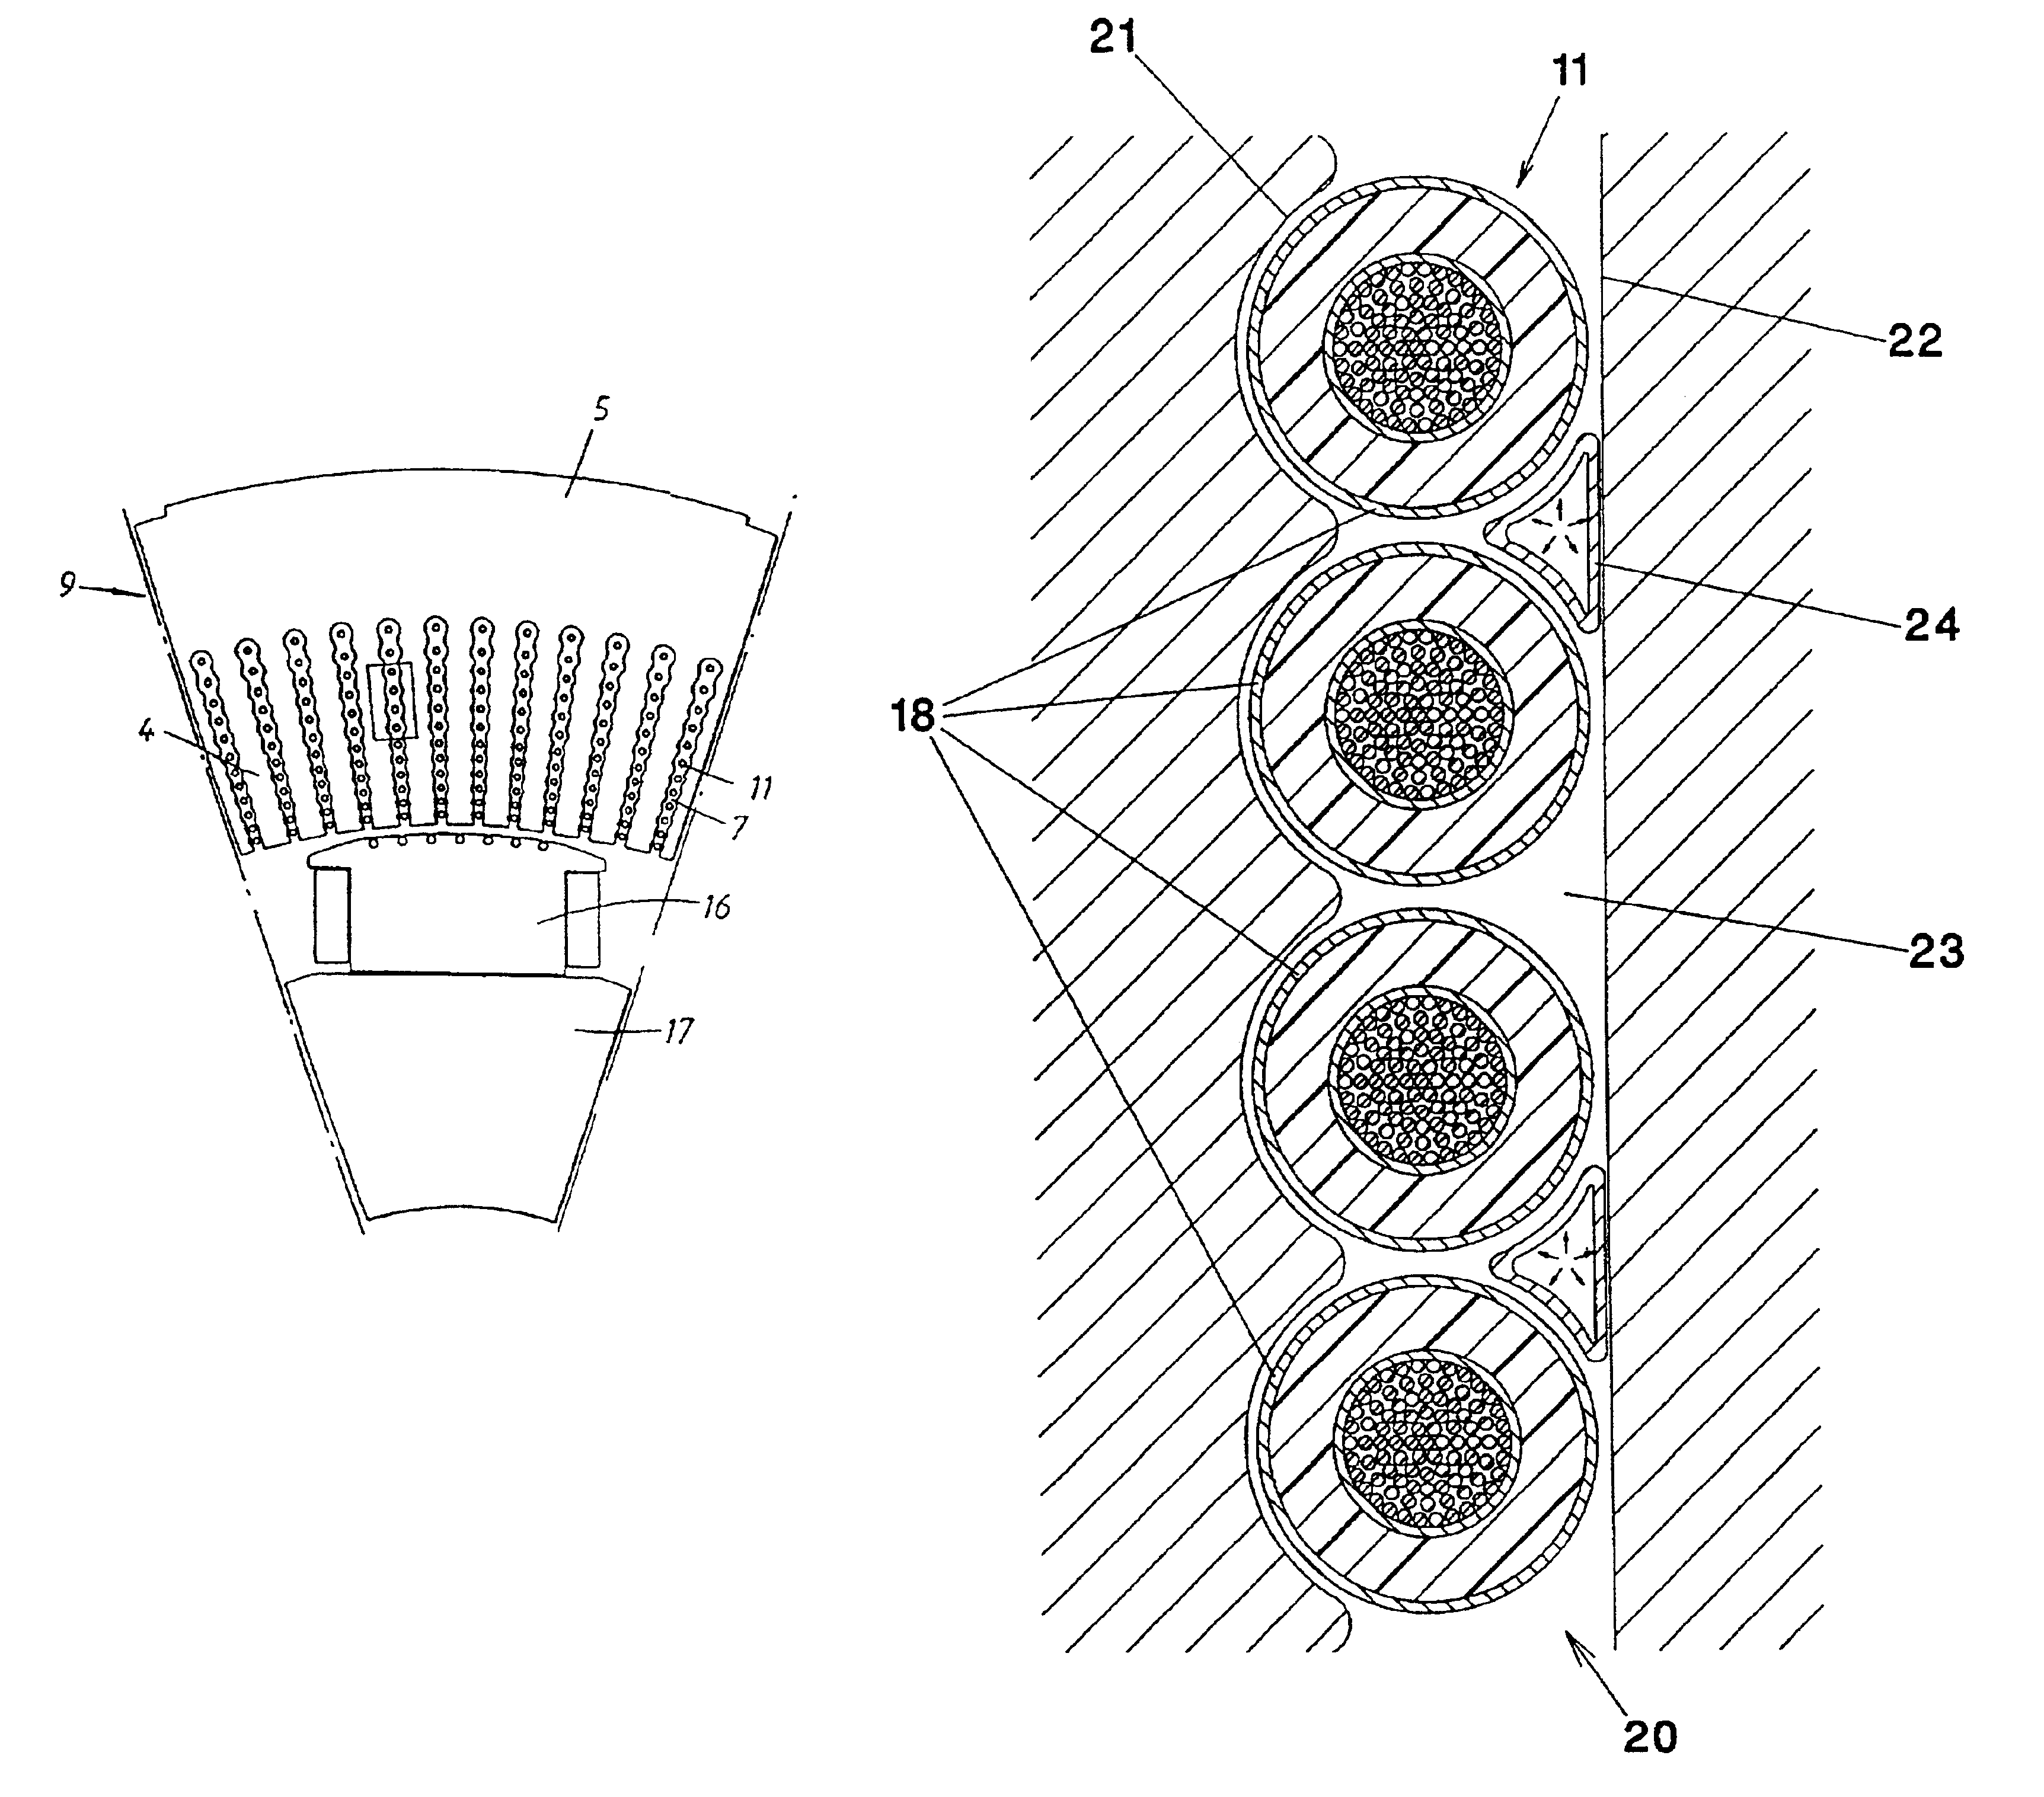 Method of applying a tube member in a stator slot in a rotating electrical machine